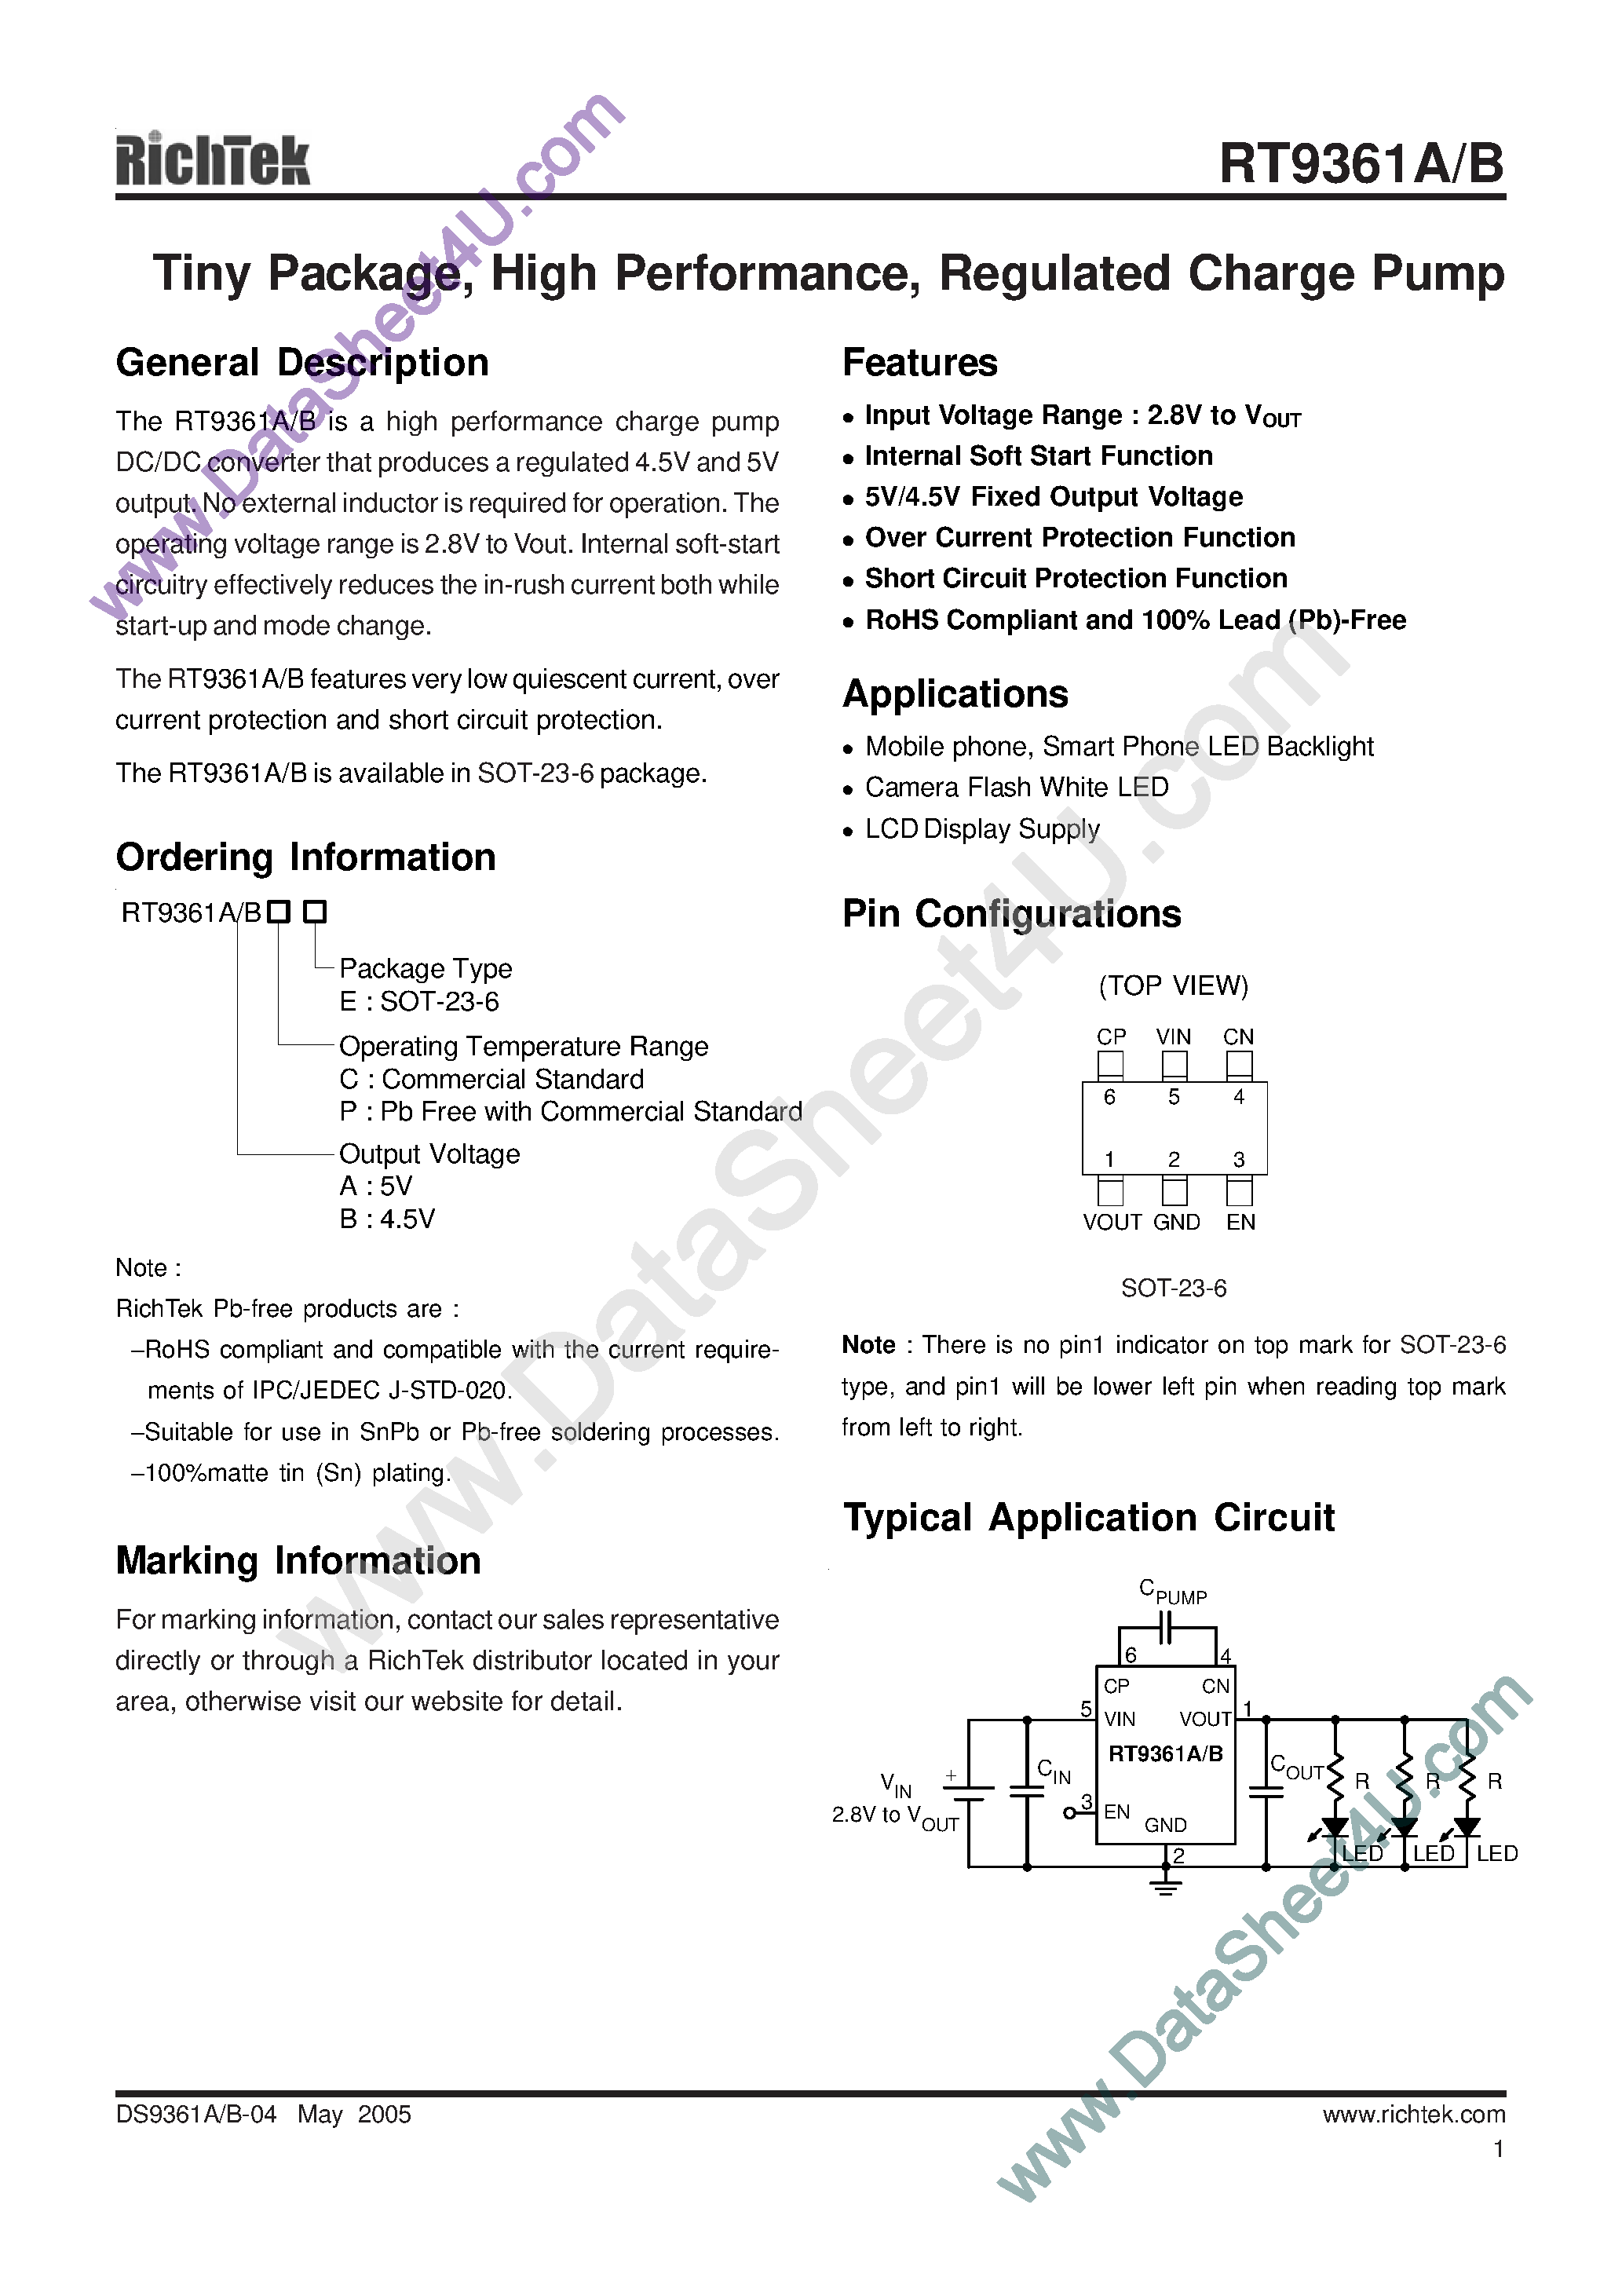 Datasheet RT9361A - (RT9361A/B) Tiny Package / High Performance / Regulated Chard Pump page 1